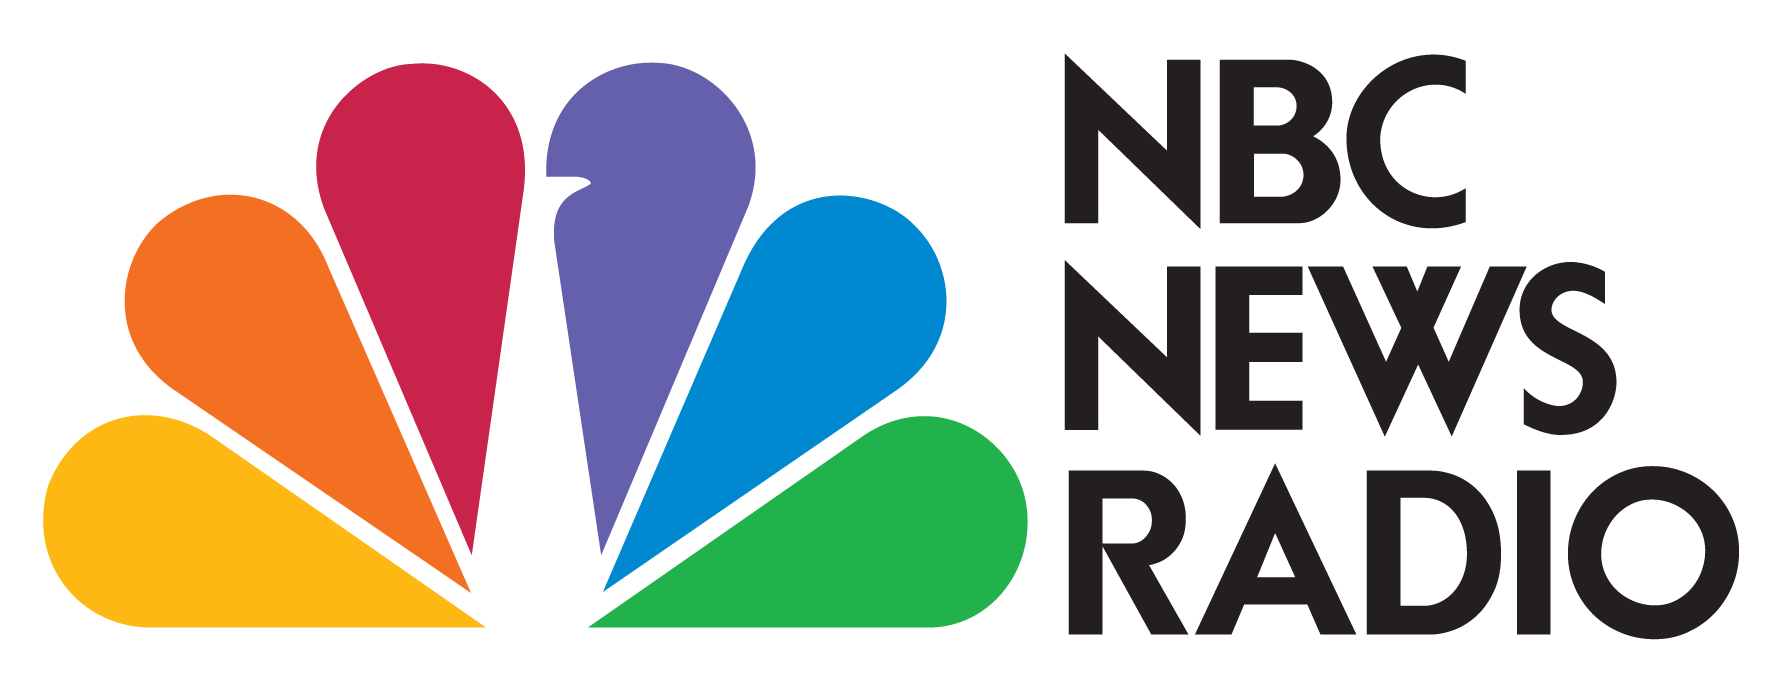 Image   Nbc News Radio Logo Stacked.png | Logopedia | Fandom Powered By Wikia - Nbc, Transparent background PNG HD thumbnail